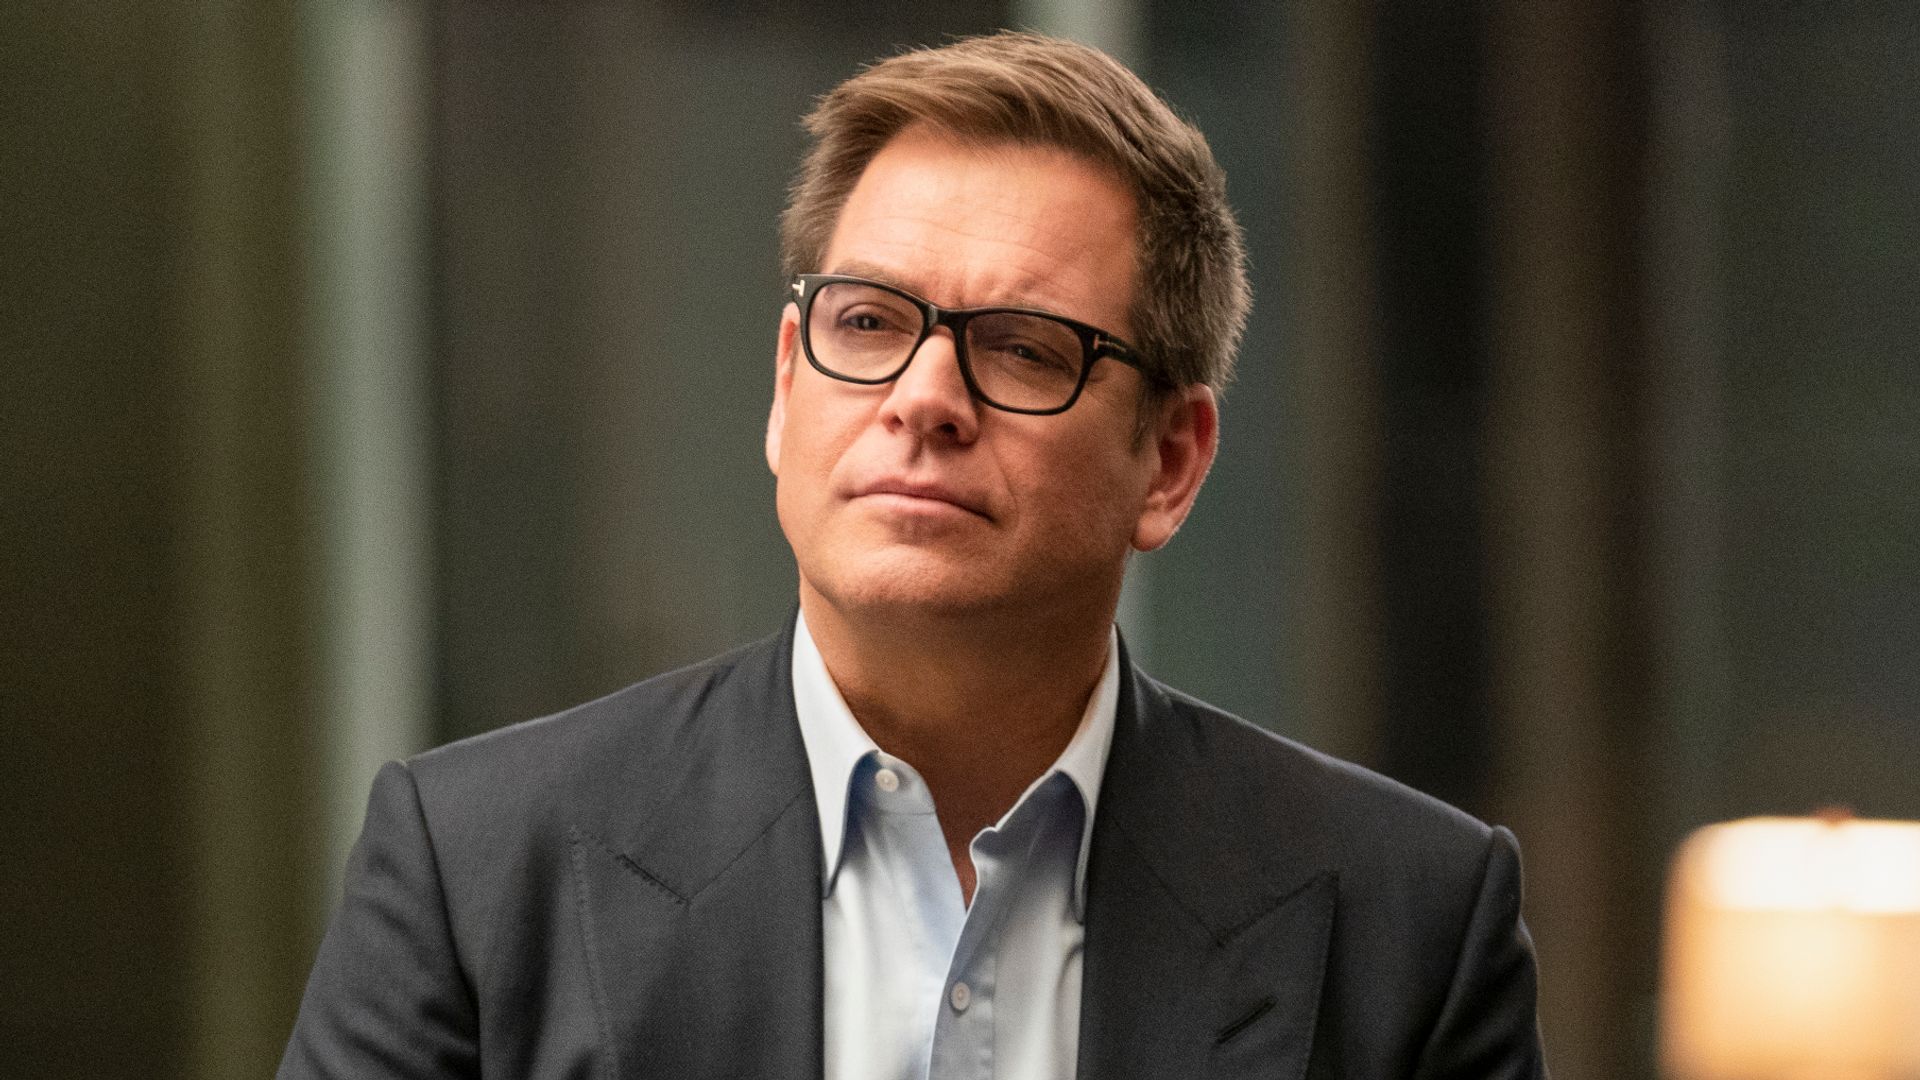 Michael Weatherly makes unexpected move amid return to NCIS leaving fans confused